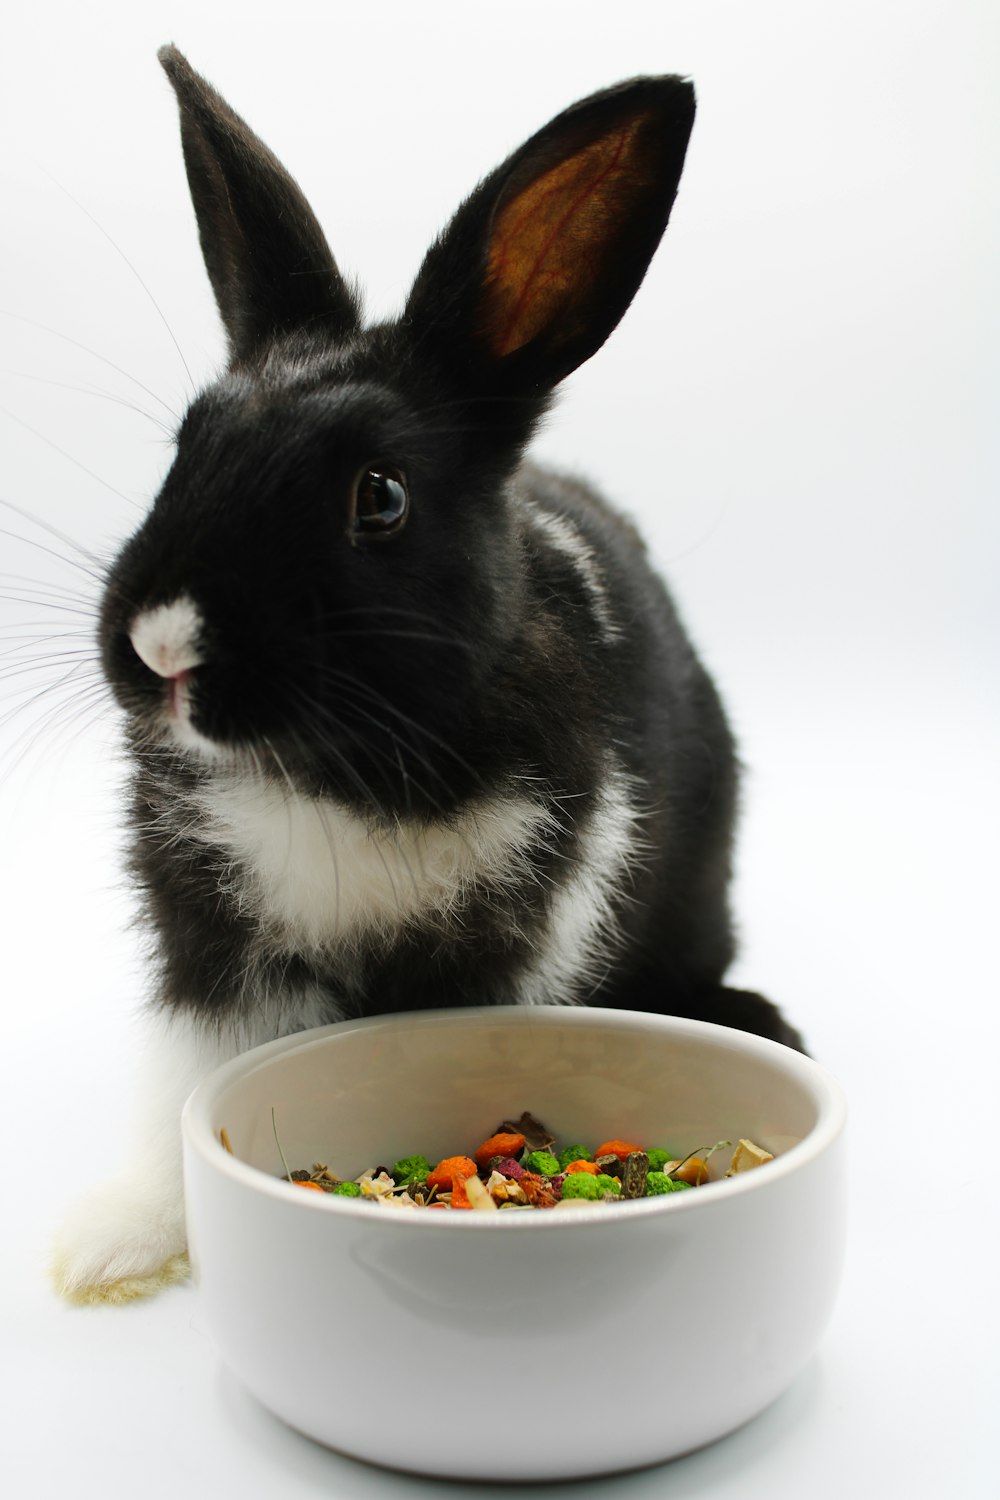 a black and white rabbit eating out of a bowl